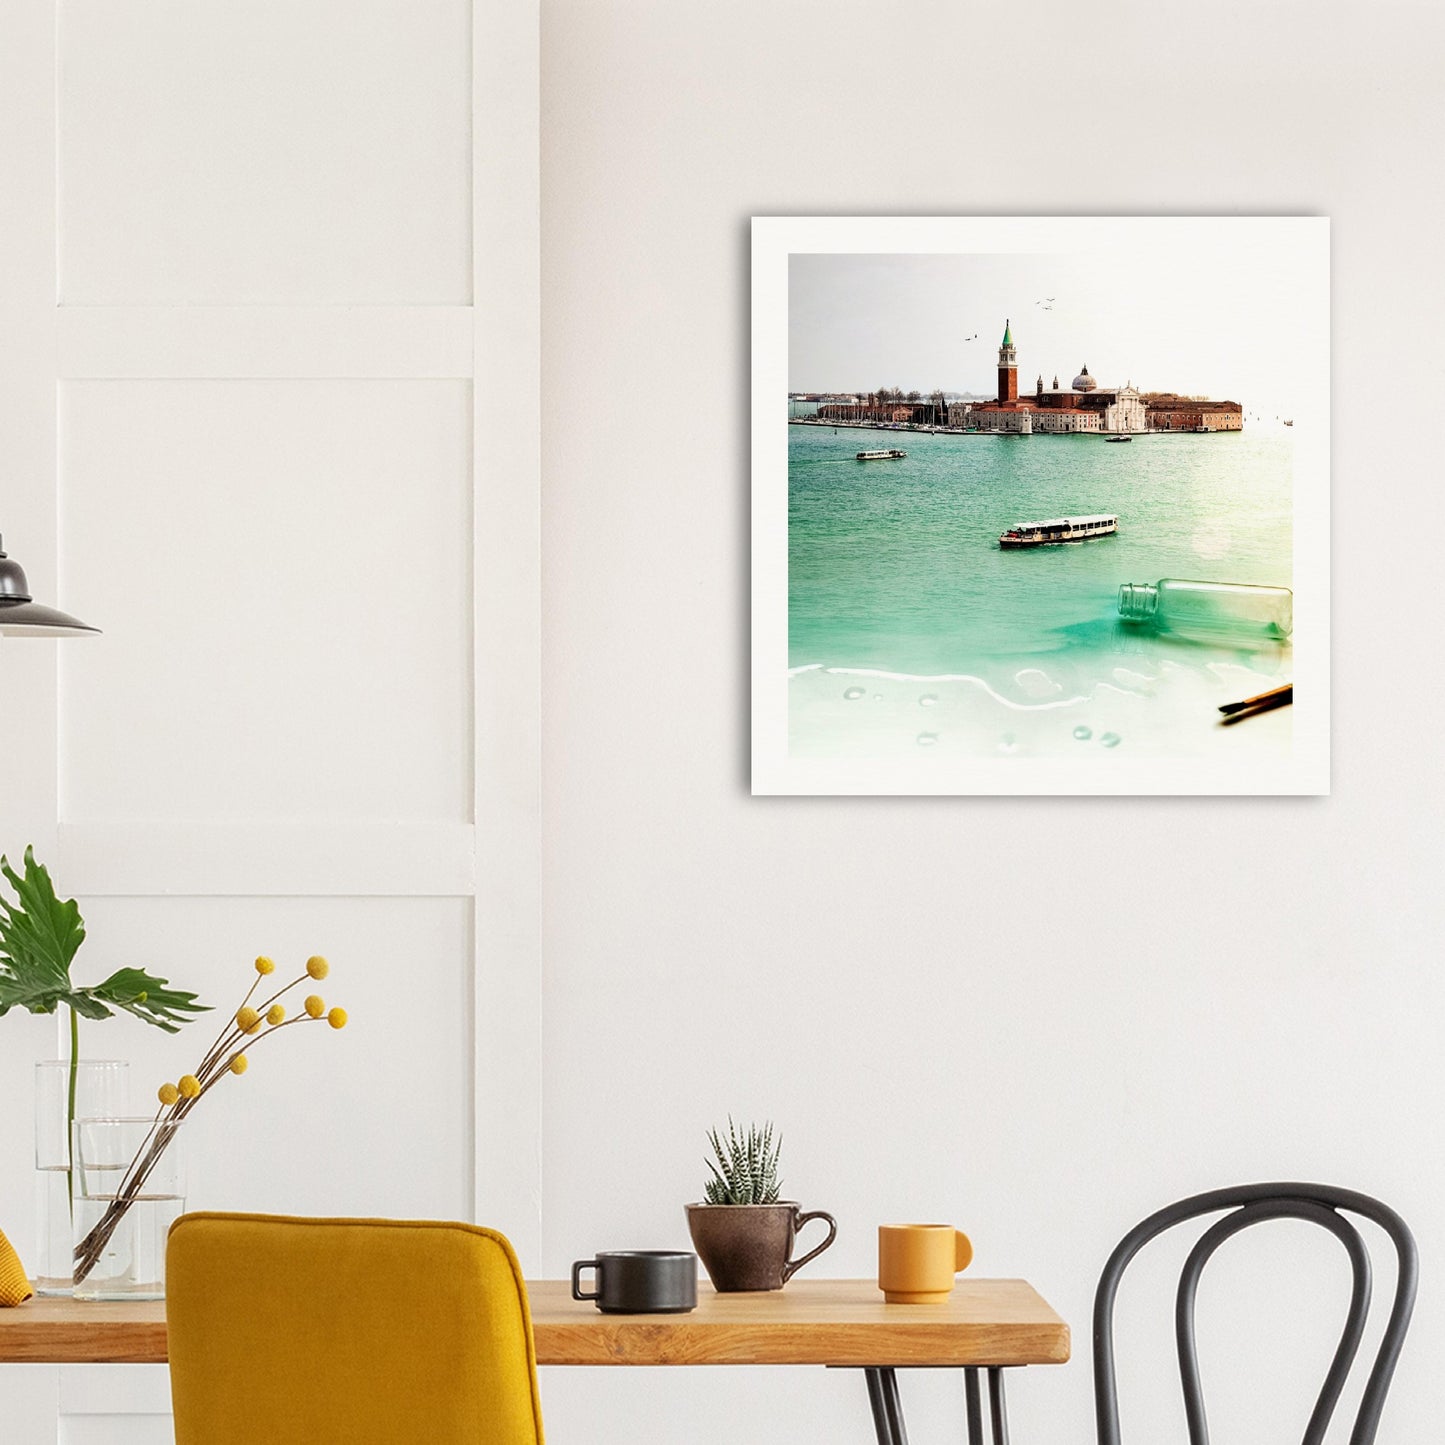 Venice In A Bottle - Museum-Quality Art Print